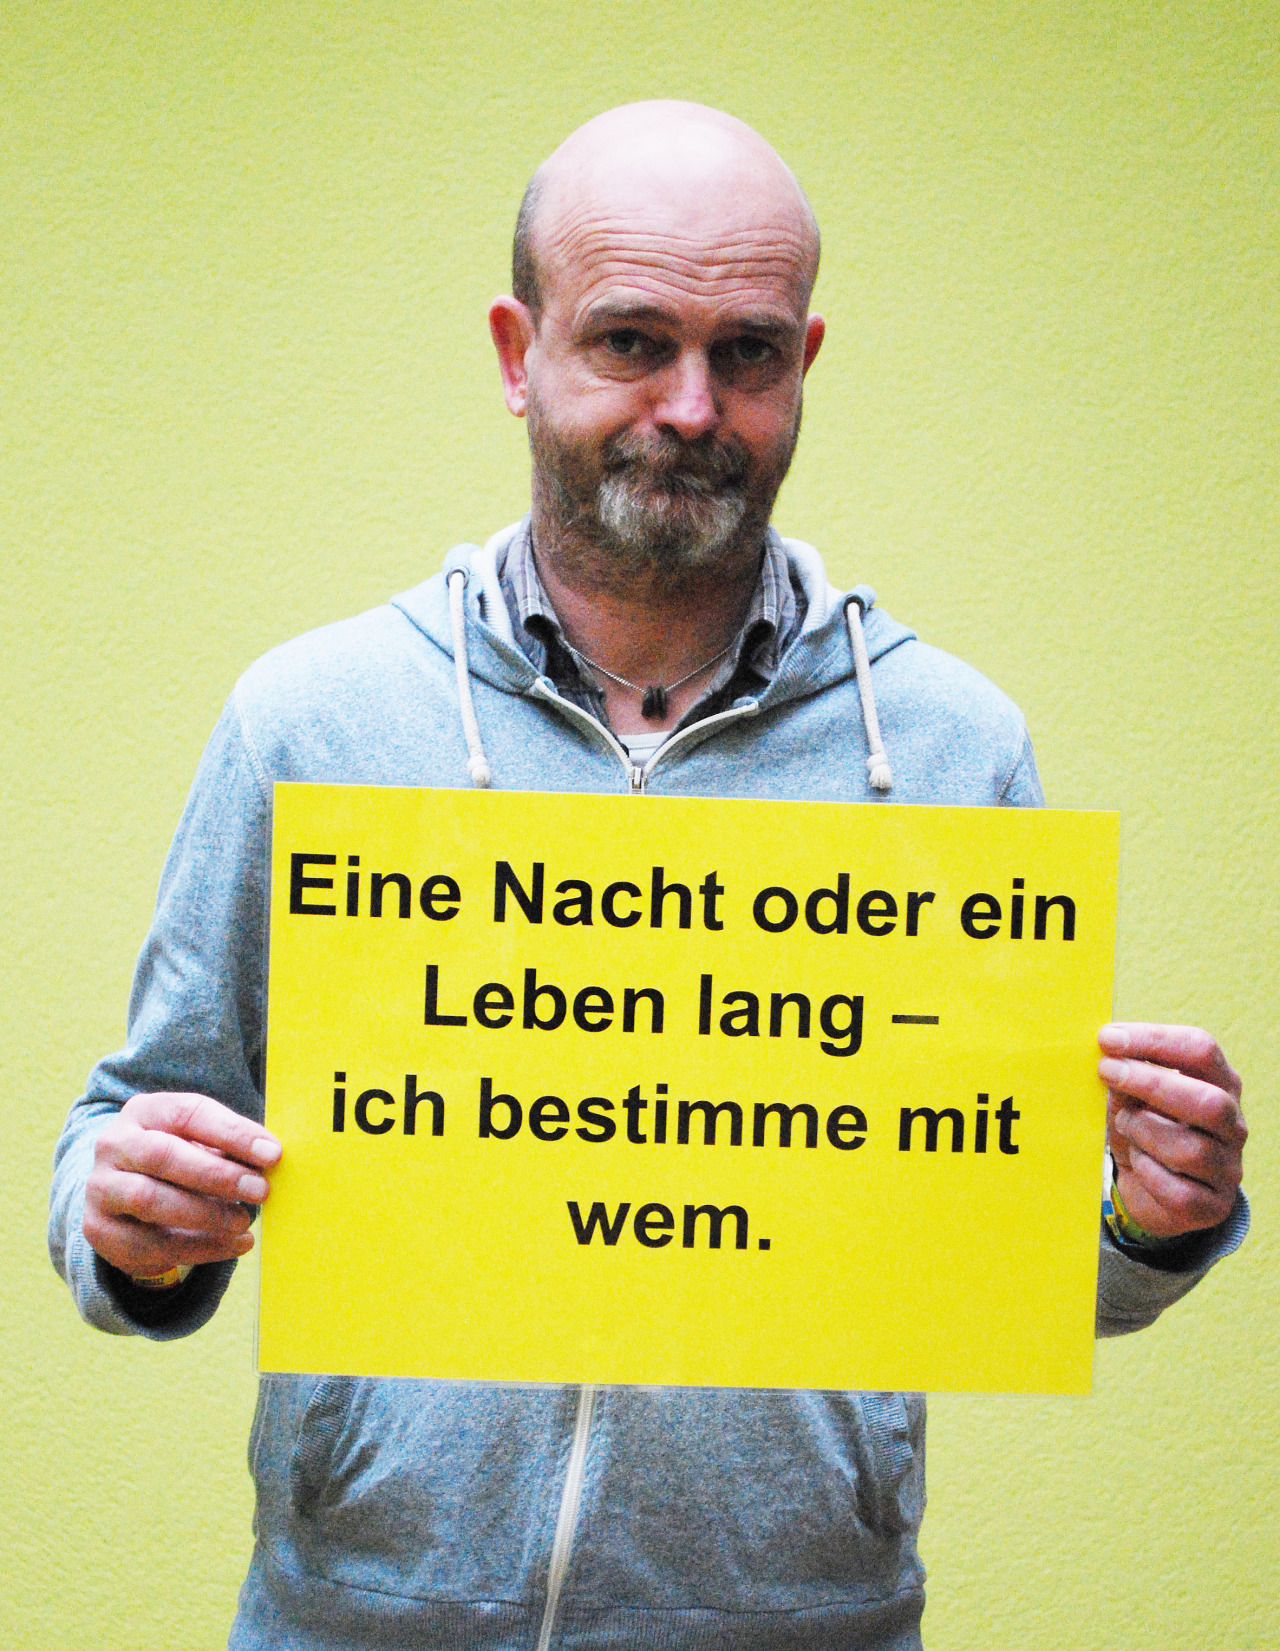 "For one night or for life? I choose with whom" Amnesty Switzerland, Bern